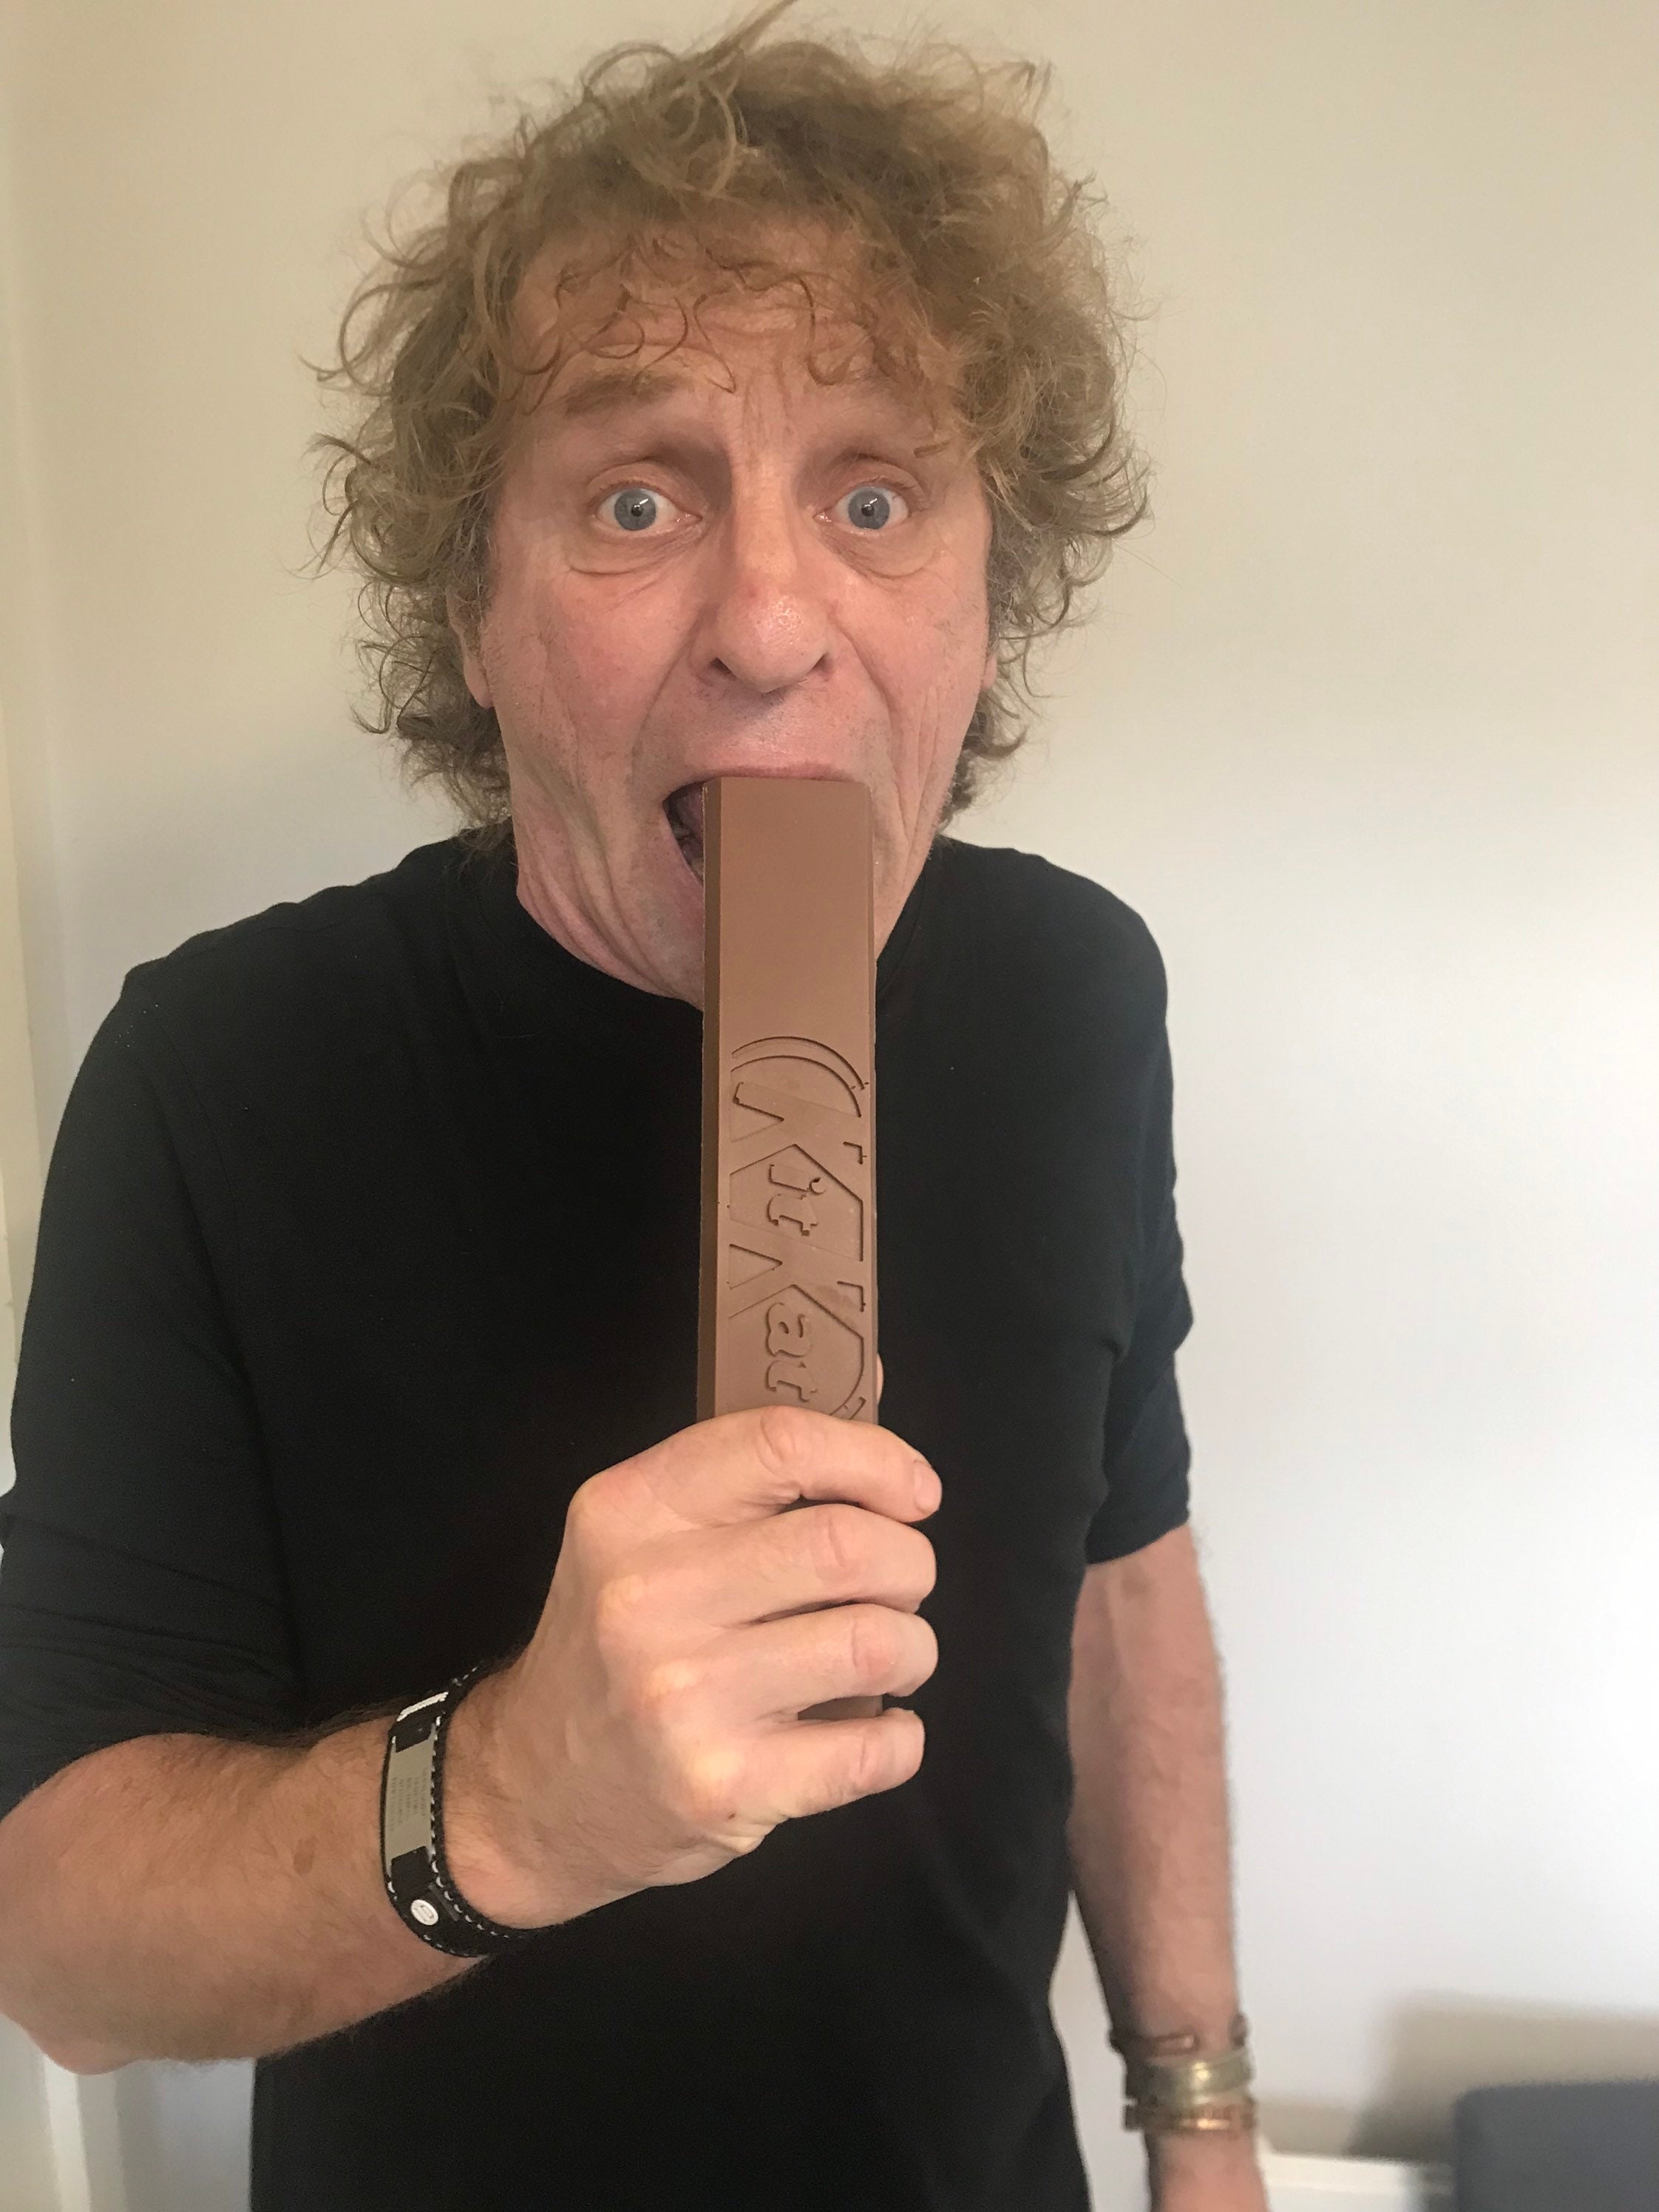 Giant Kitkat Take a Really Long Break .A Four Finger Bar 10 Inches